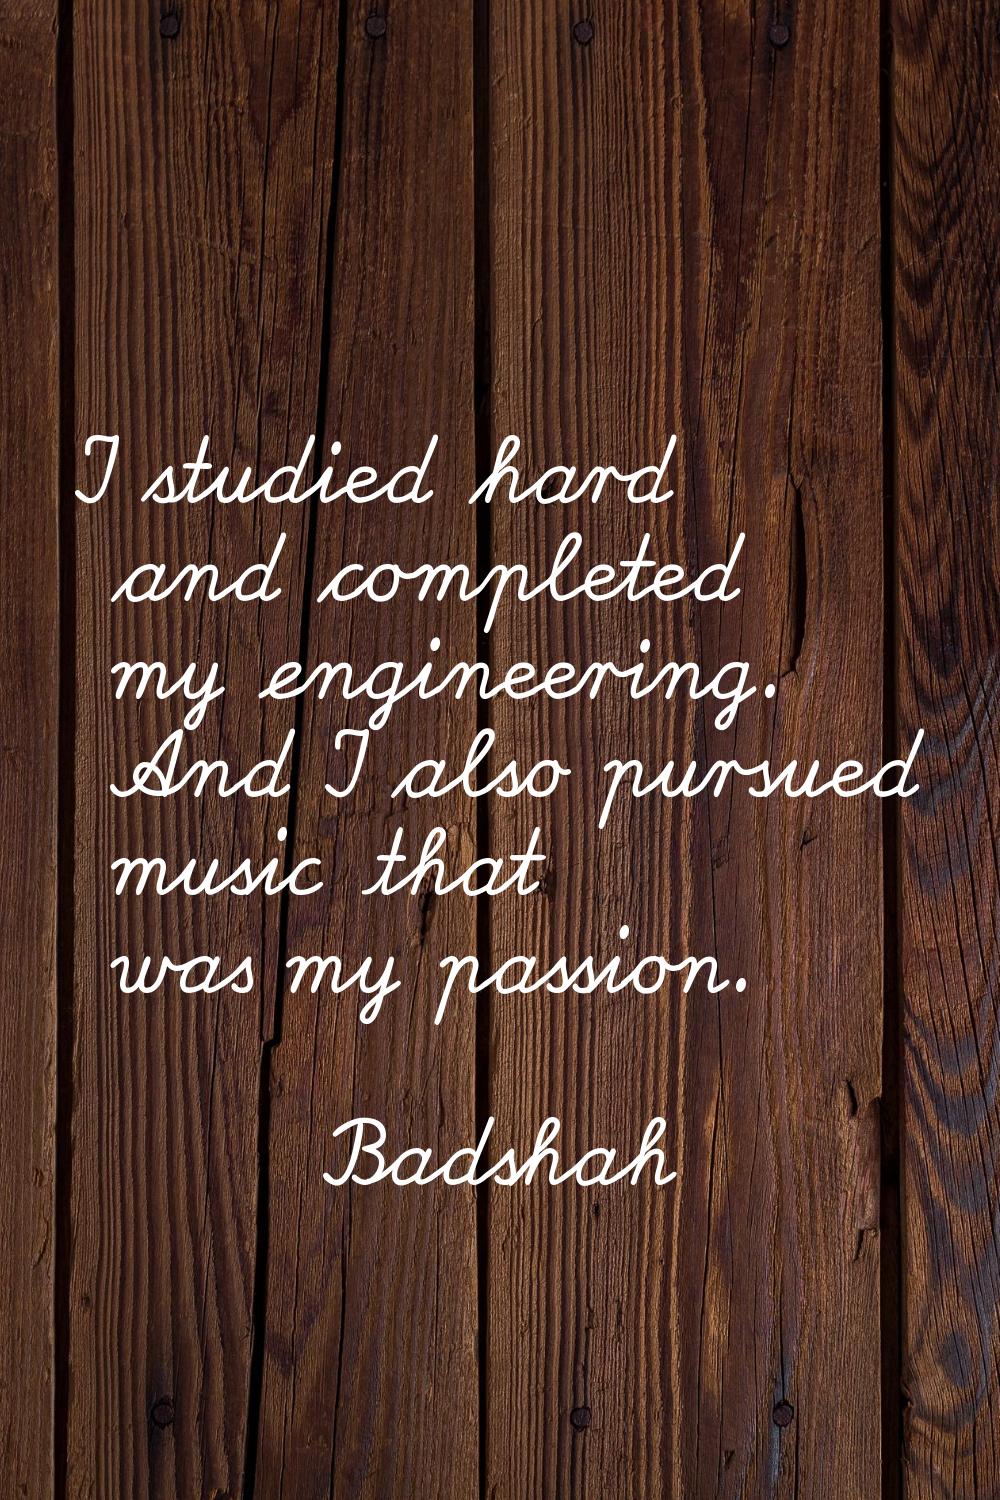 I studied hard and completed my engineering. And I also pursued music that was my passion.